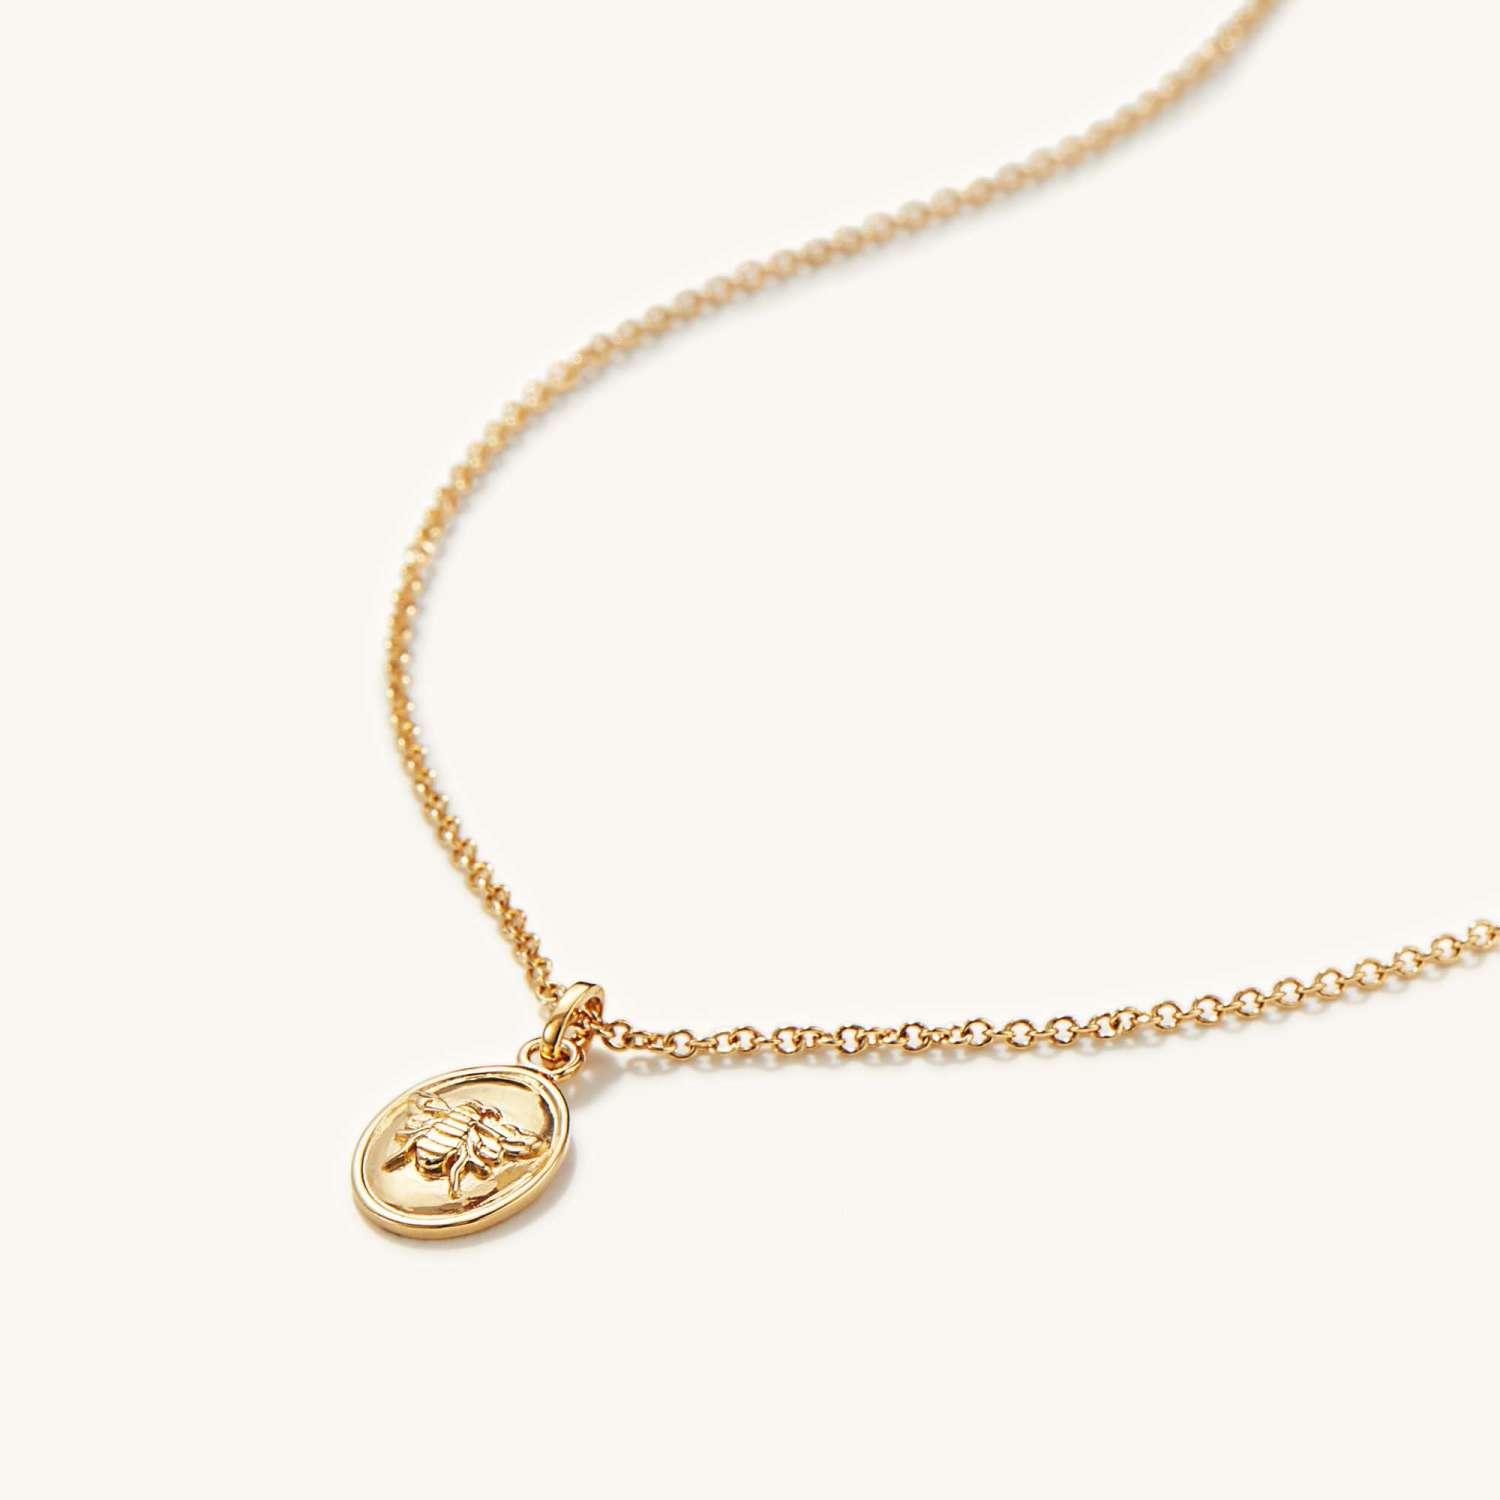 9 Giftable Jewellery Pieces We're Swooning Over- They're Solid Gold